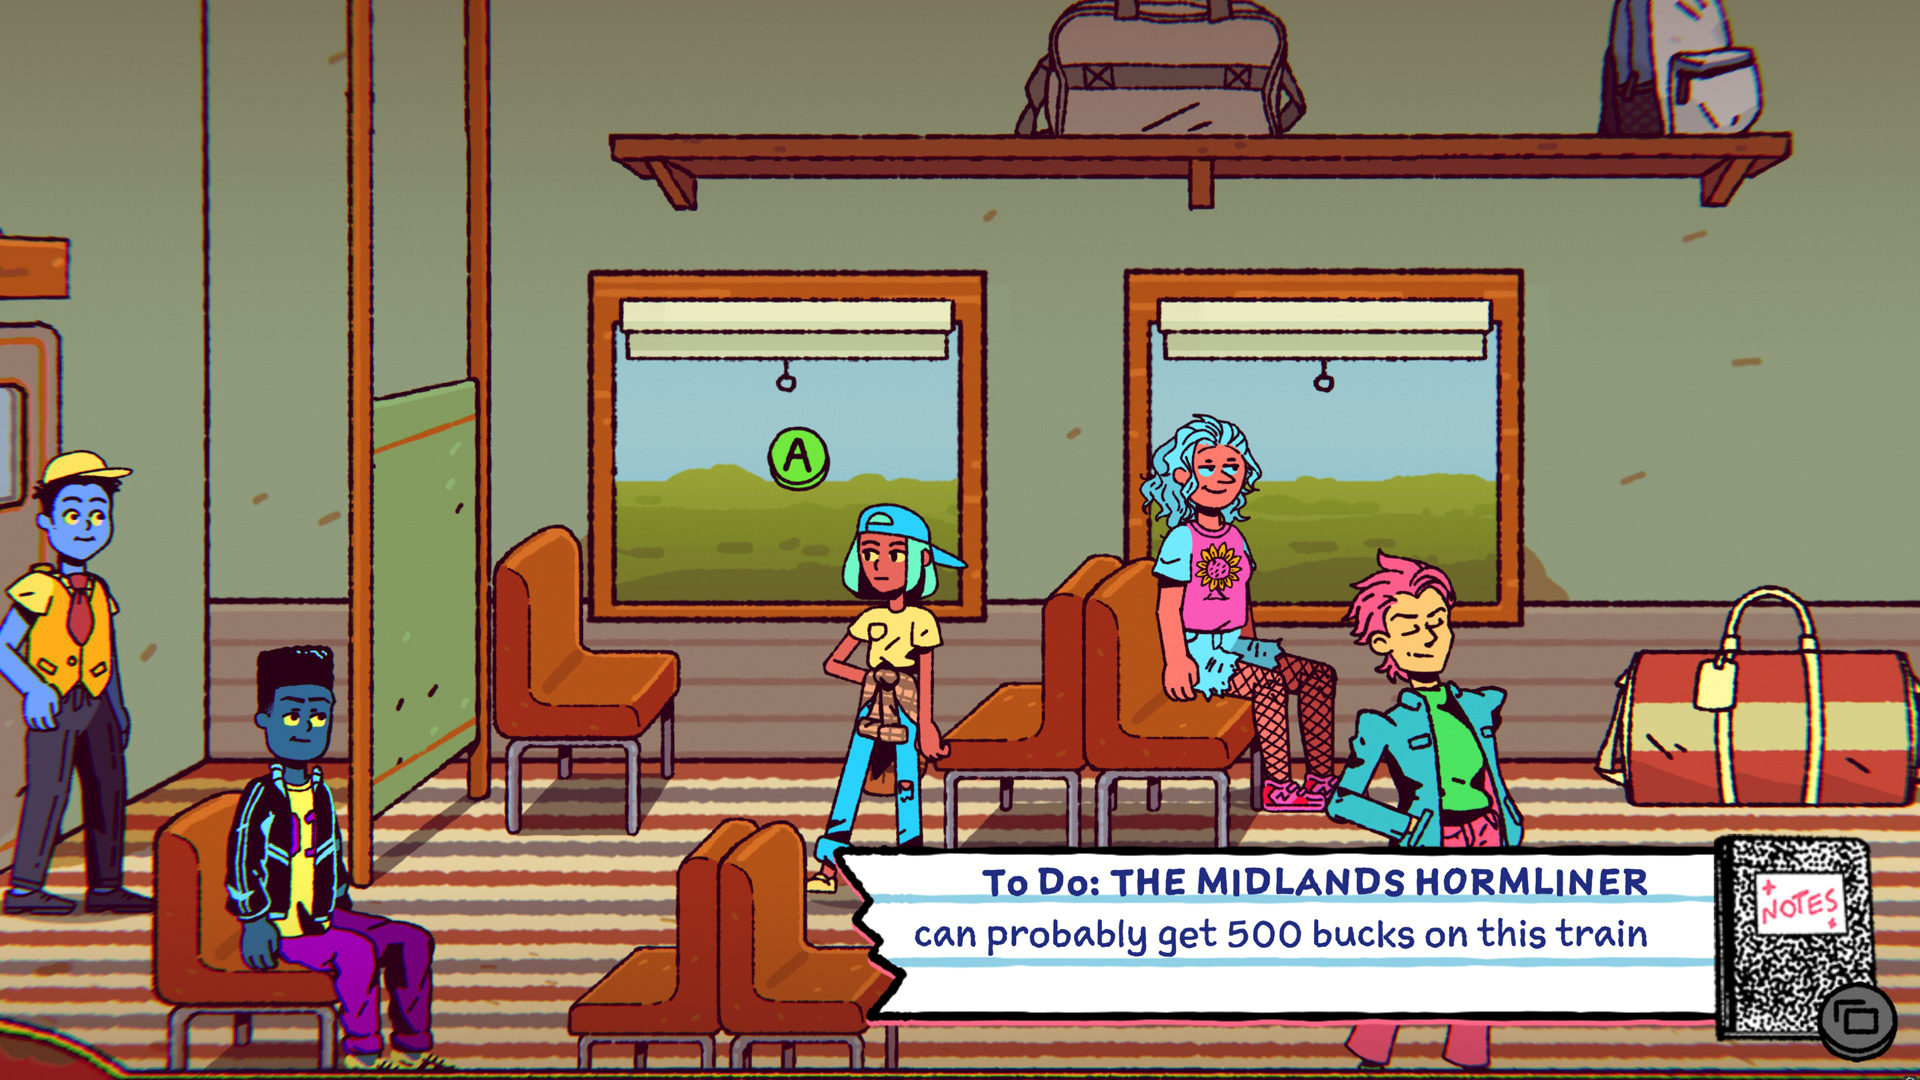 Ali standing in a train car with other passengers. A notebook objective is displayed near the bottom of the screen that reads, 'To do: THE MIDLANDS HORMLINER - Can probably get 500 bucks on this train.'